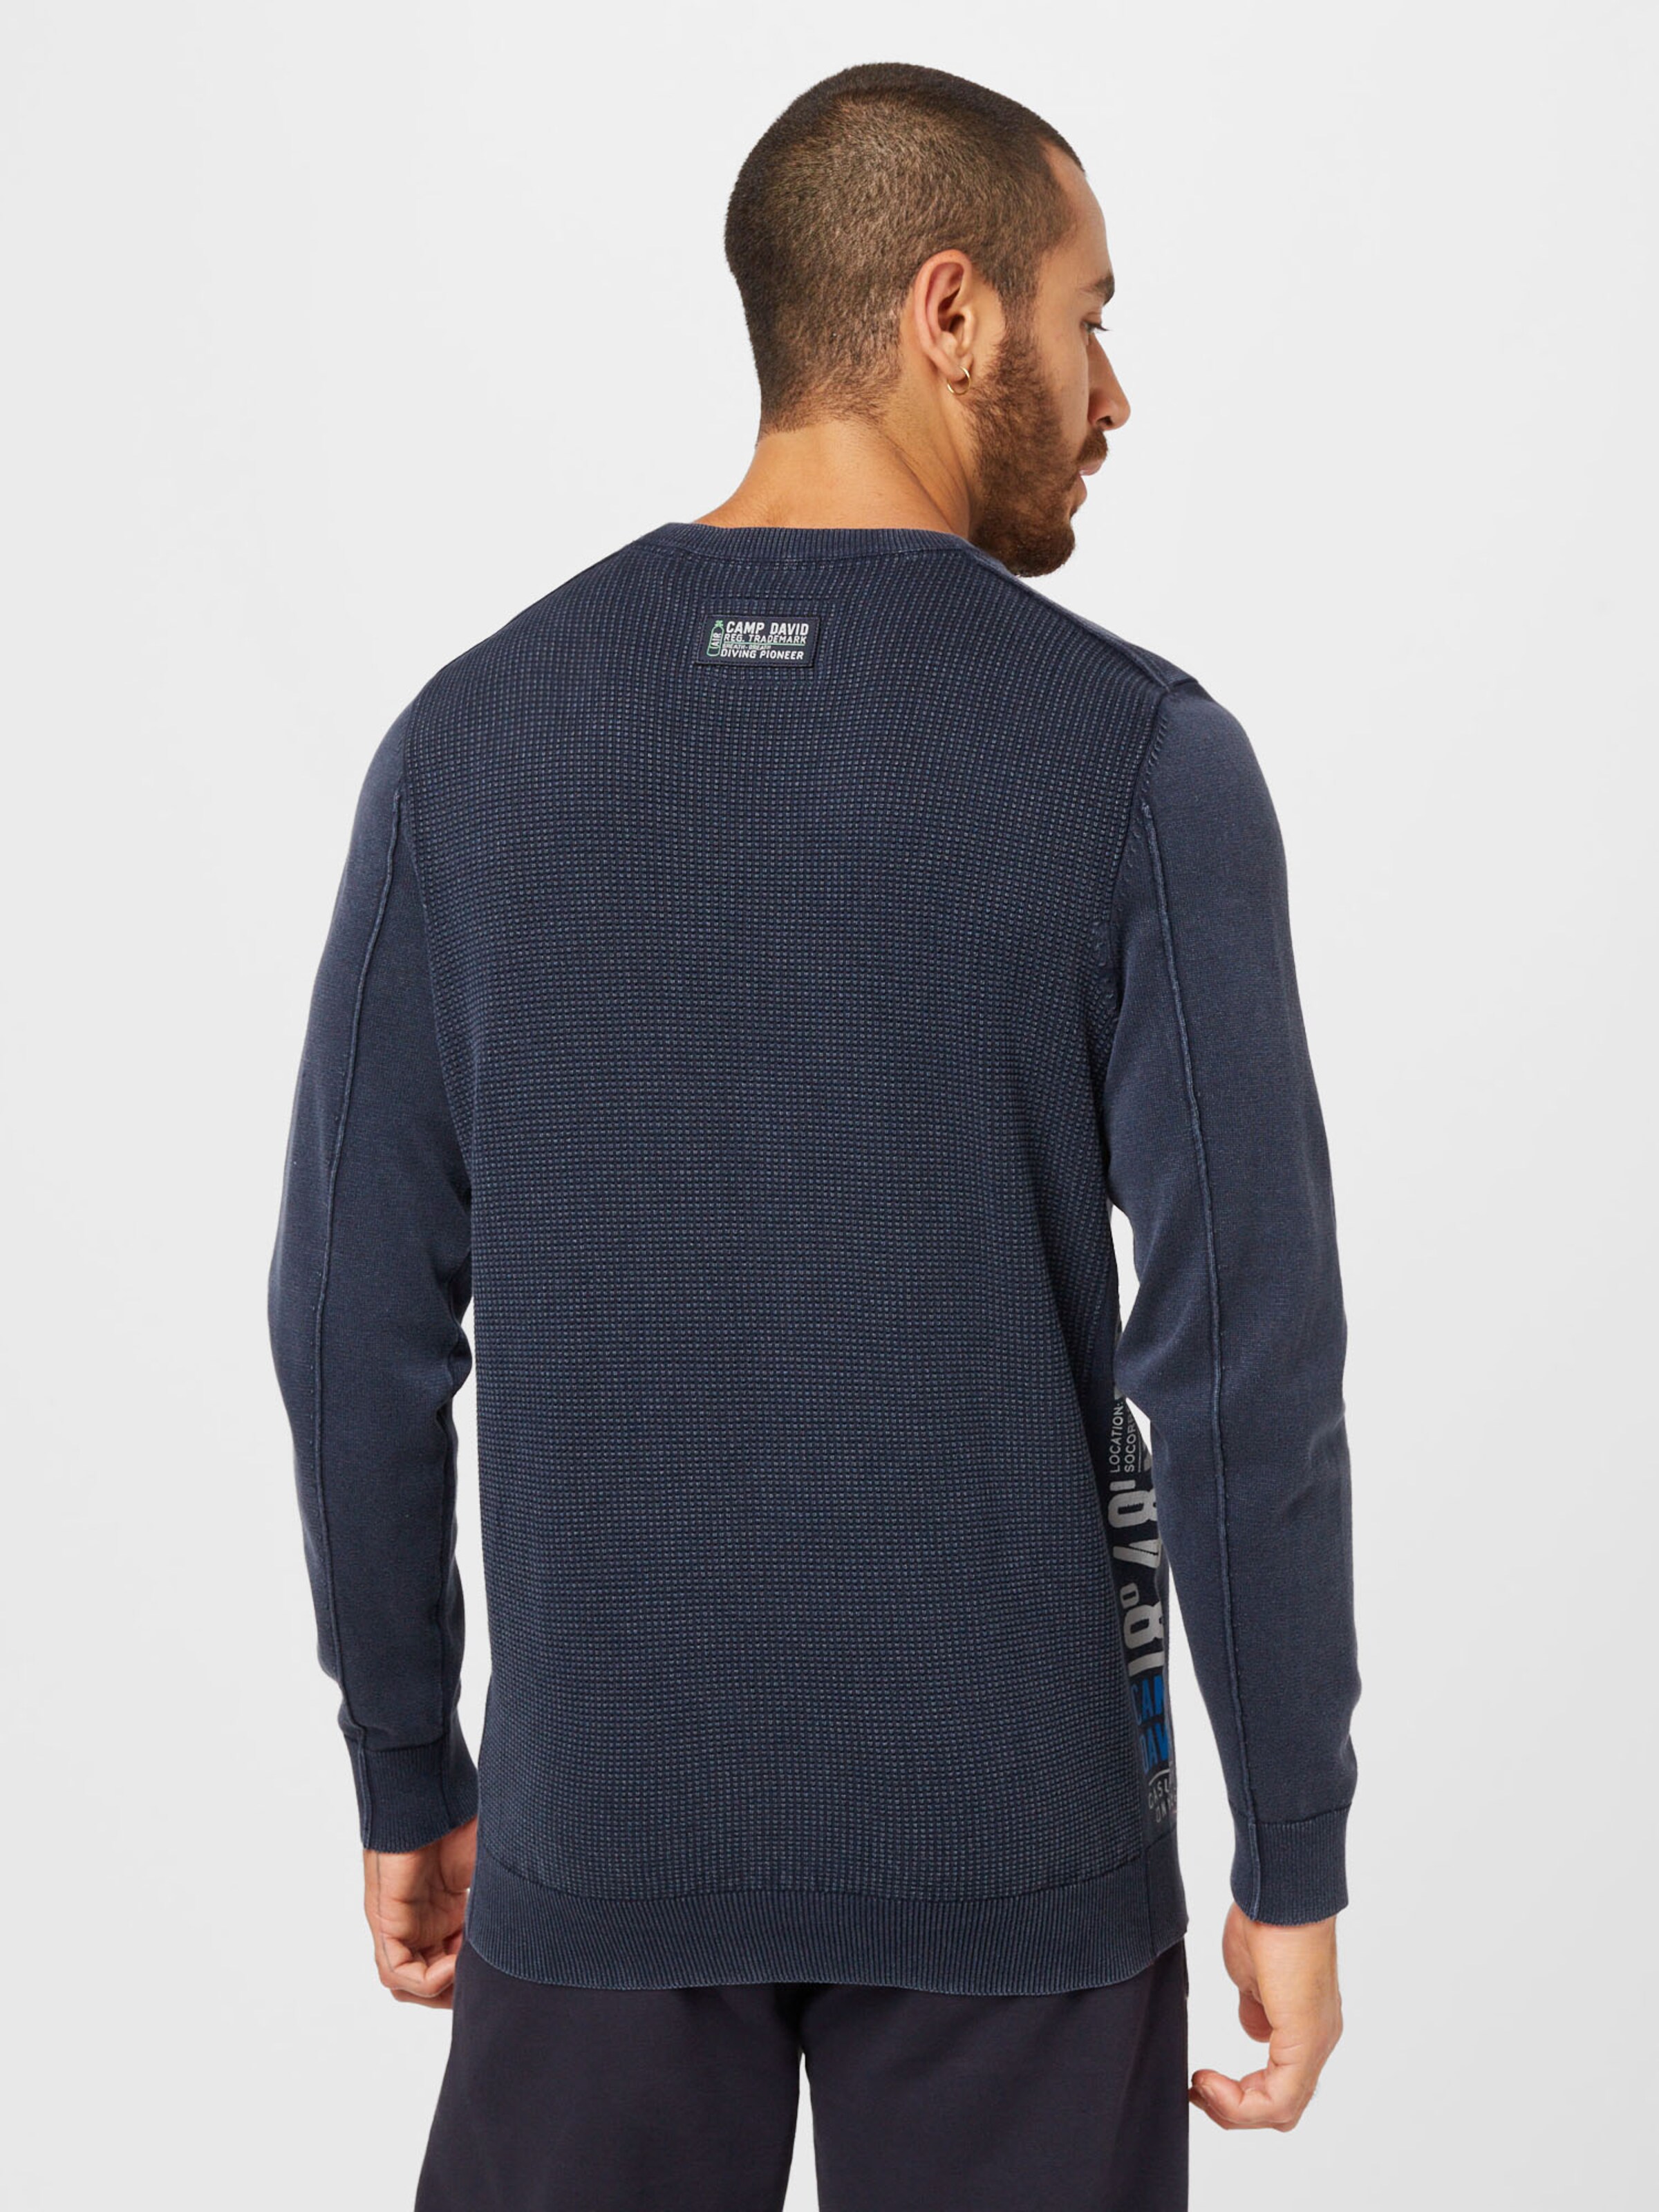 CAMP DAVID Pullover in Navy | ABOUT YOU